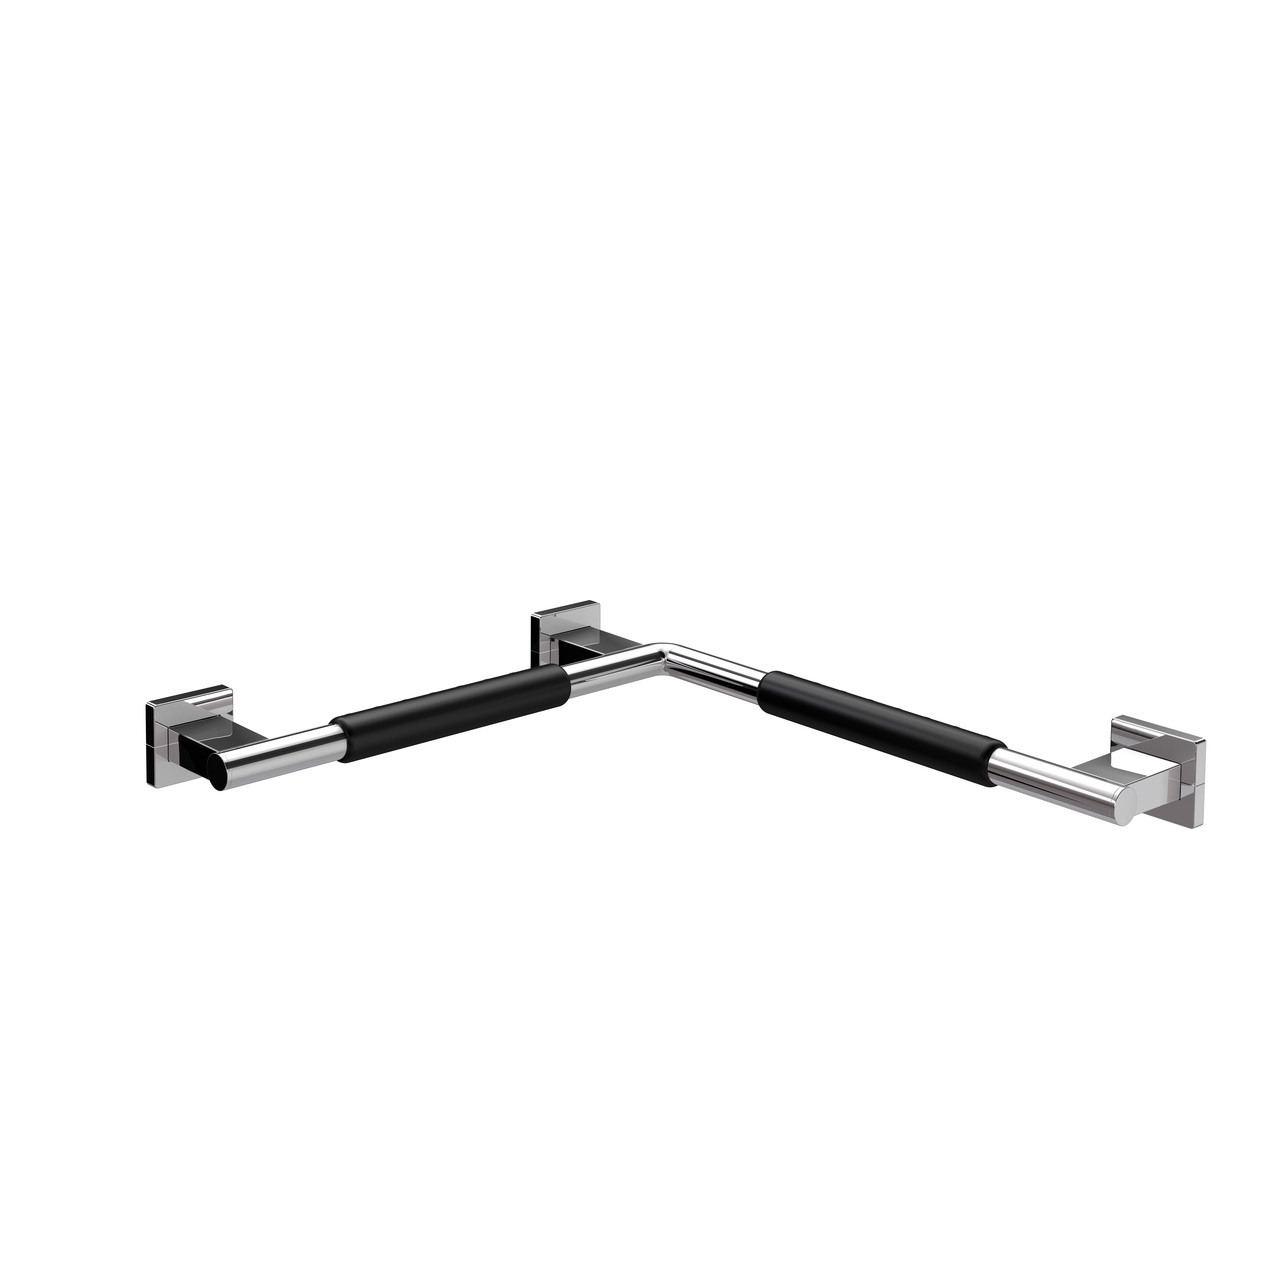 System Corner Grip Grab Bar with Non-Skid Coating